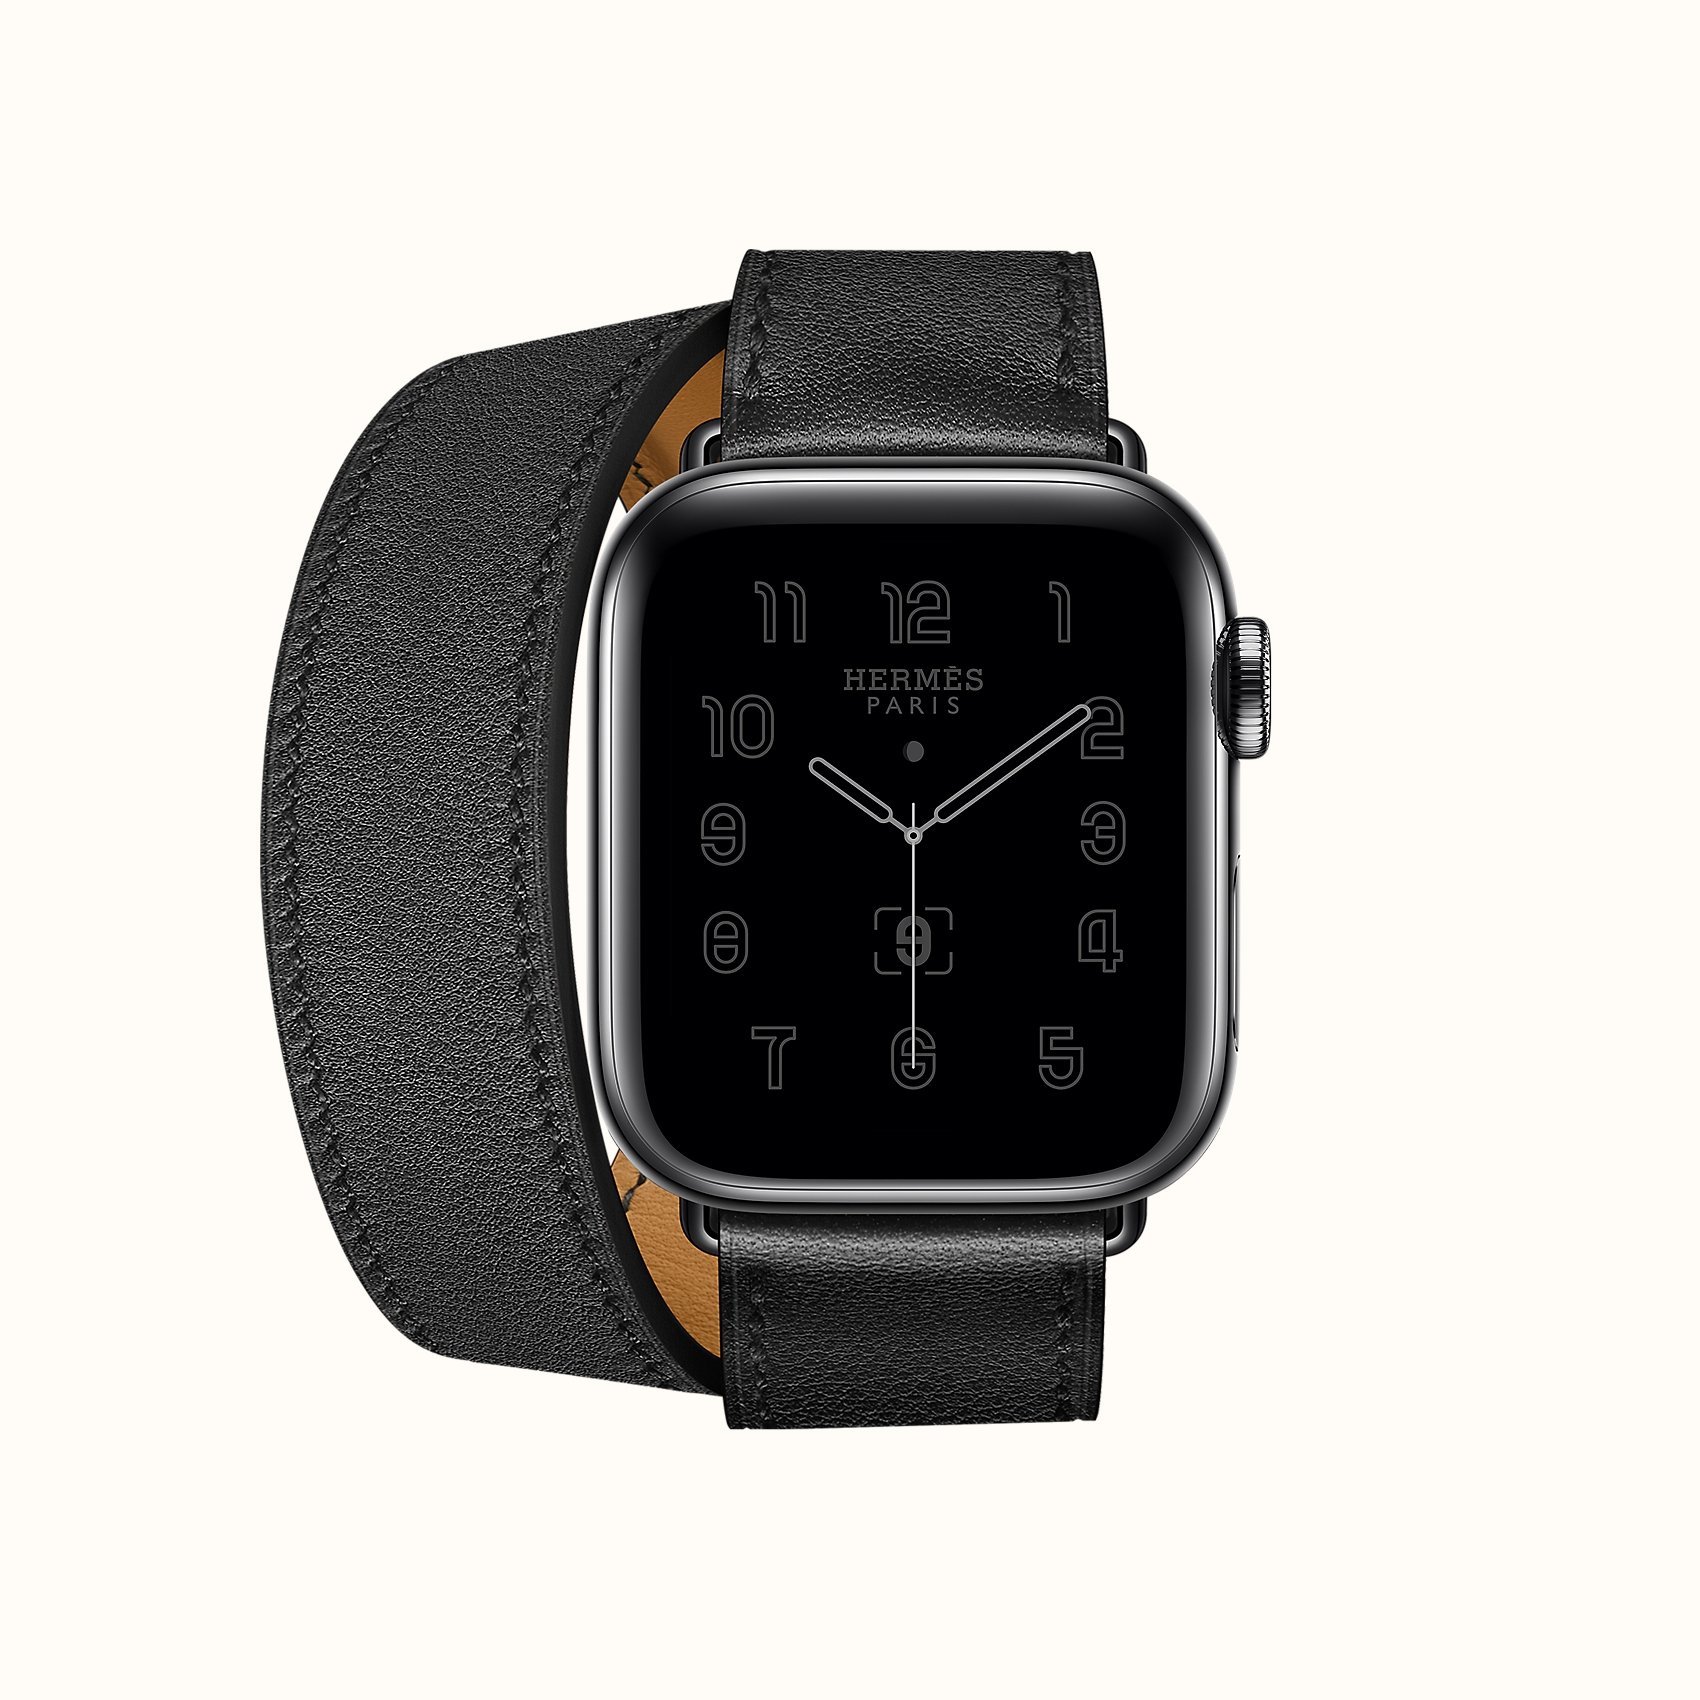 Space Black Series 6 case & Band Apple Watch Hermes Double Tour 40